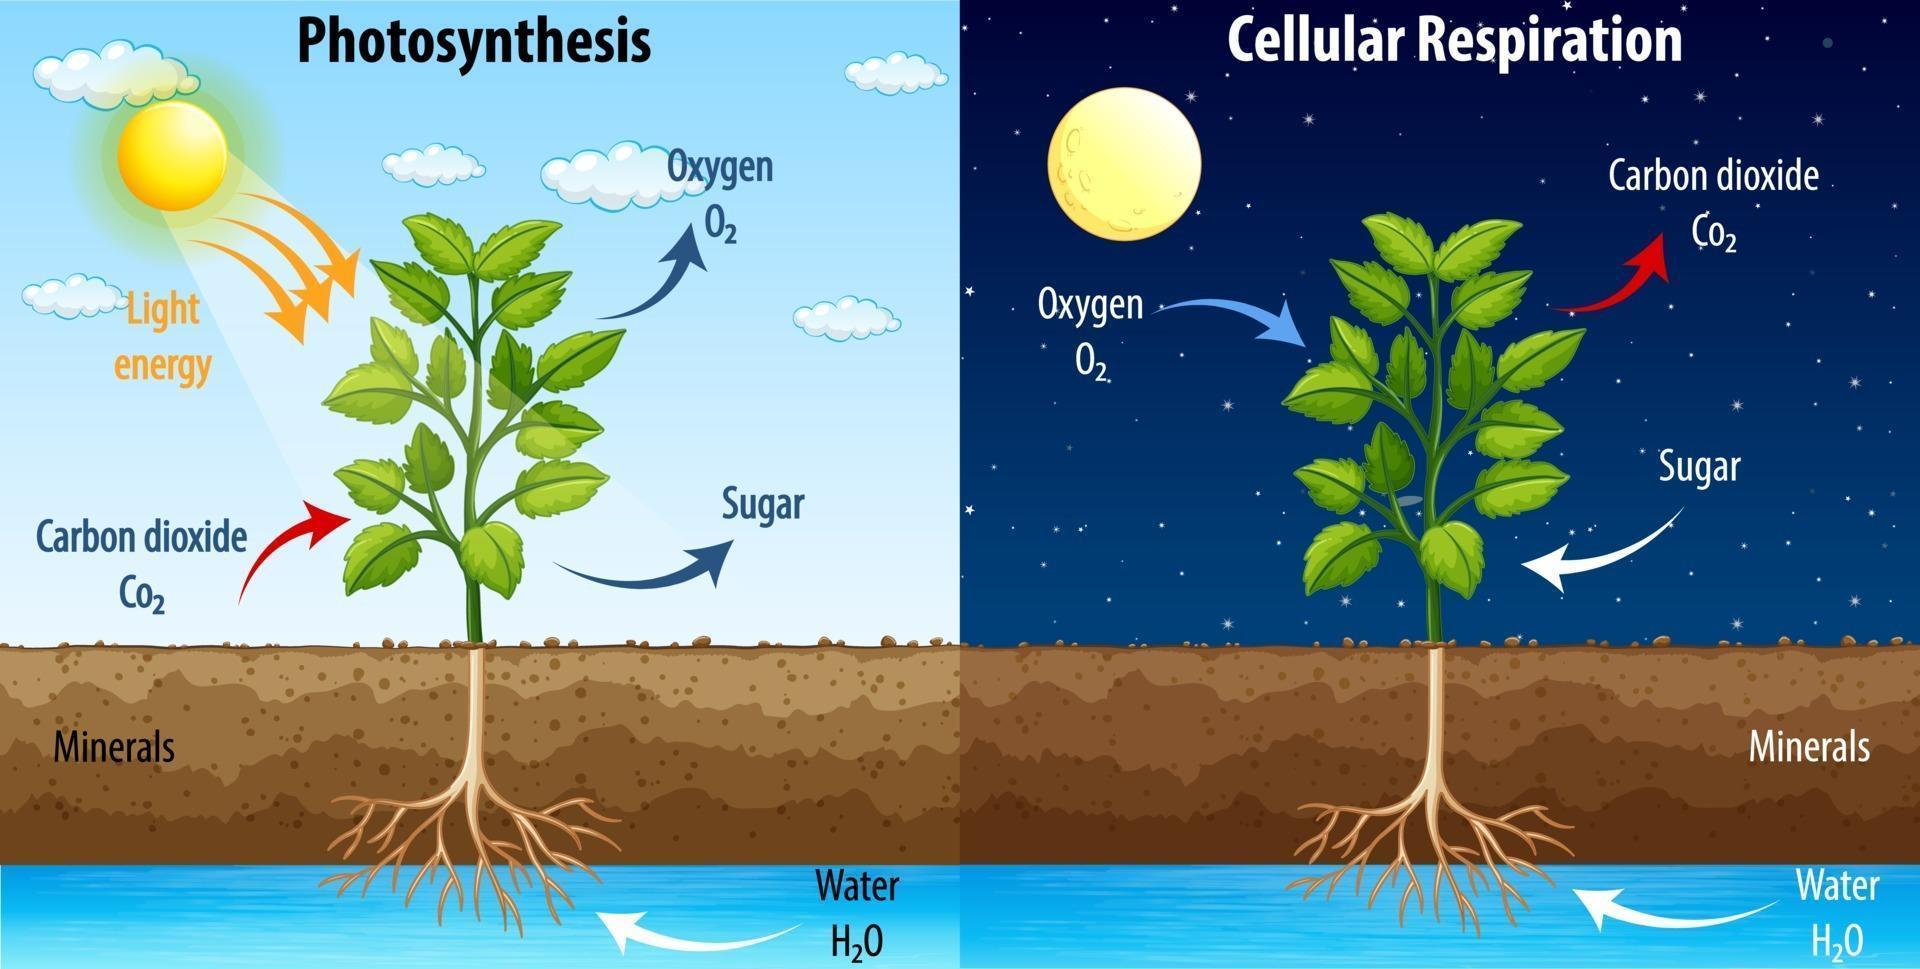 Diagram Showing Process Of Photosynthesis And Cellular Respiration Free Vector ?width=2880&name=diagram Showing Process Of Photosynthesis And Cellular Respiration Free Vector 